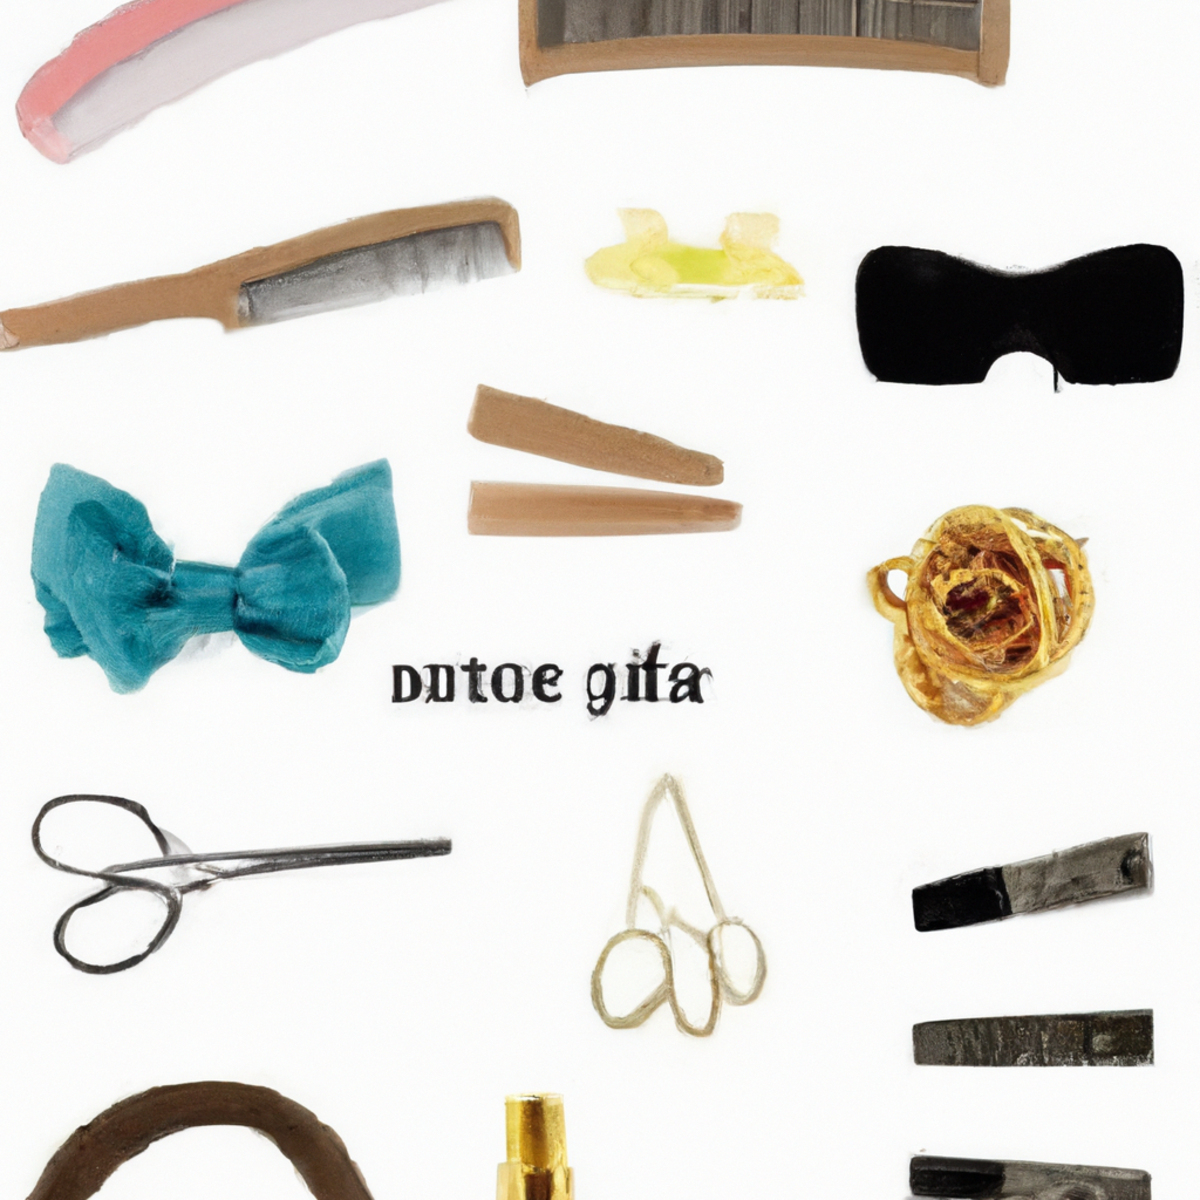 Assorted elegant hair accessories artfully arranged, highlighting quality and craftsmanship for effortlessly stylish hair.